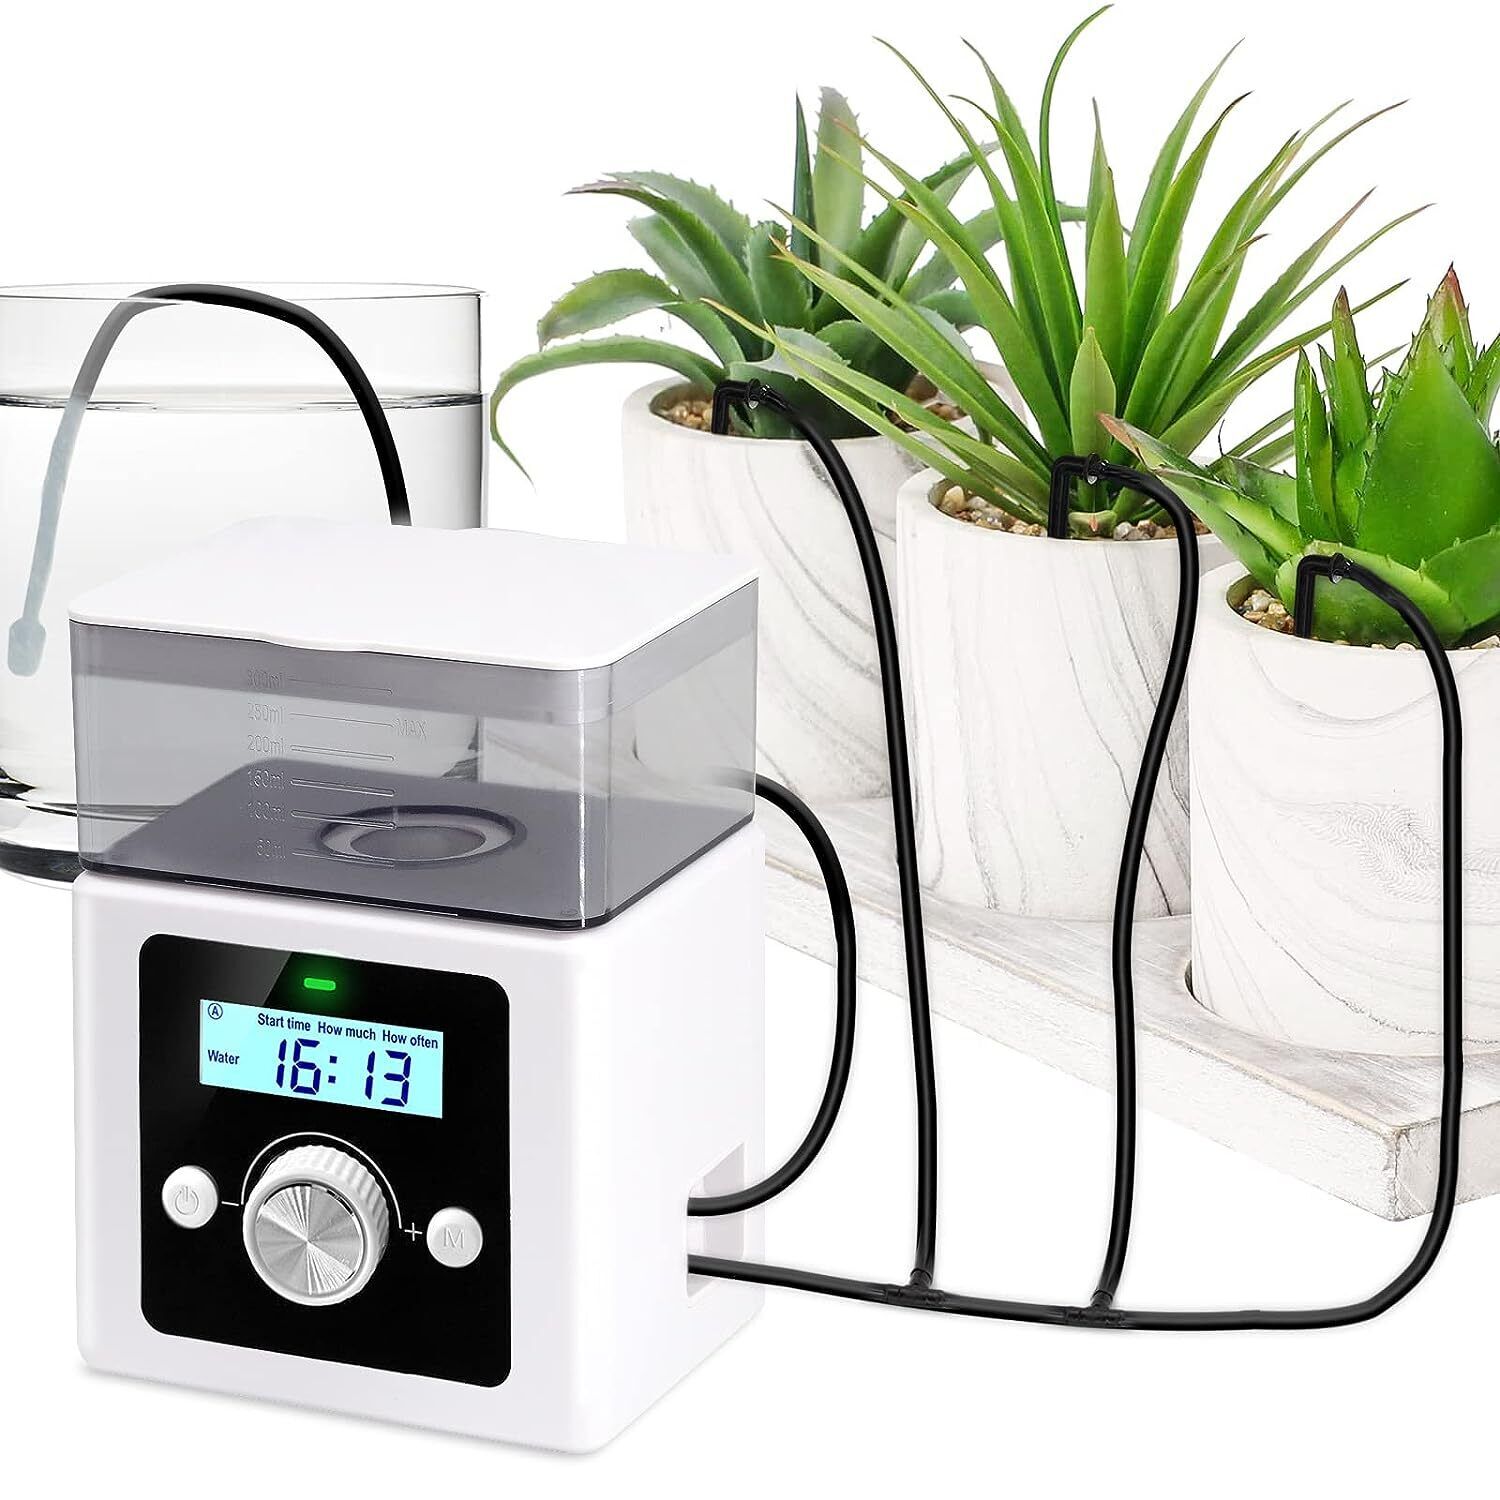 Automatic Watering System for Potted Plants,Indoor Watering System for